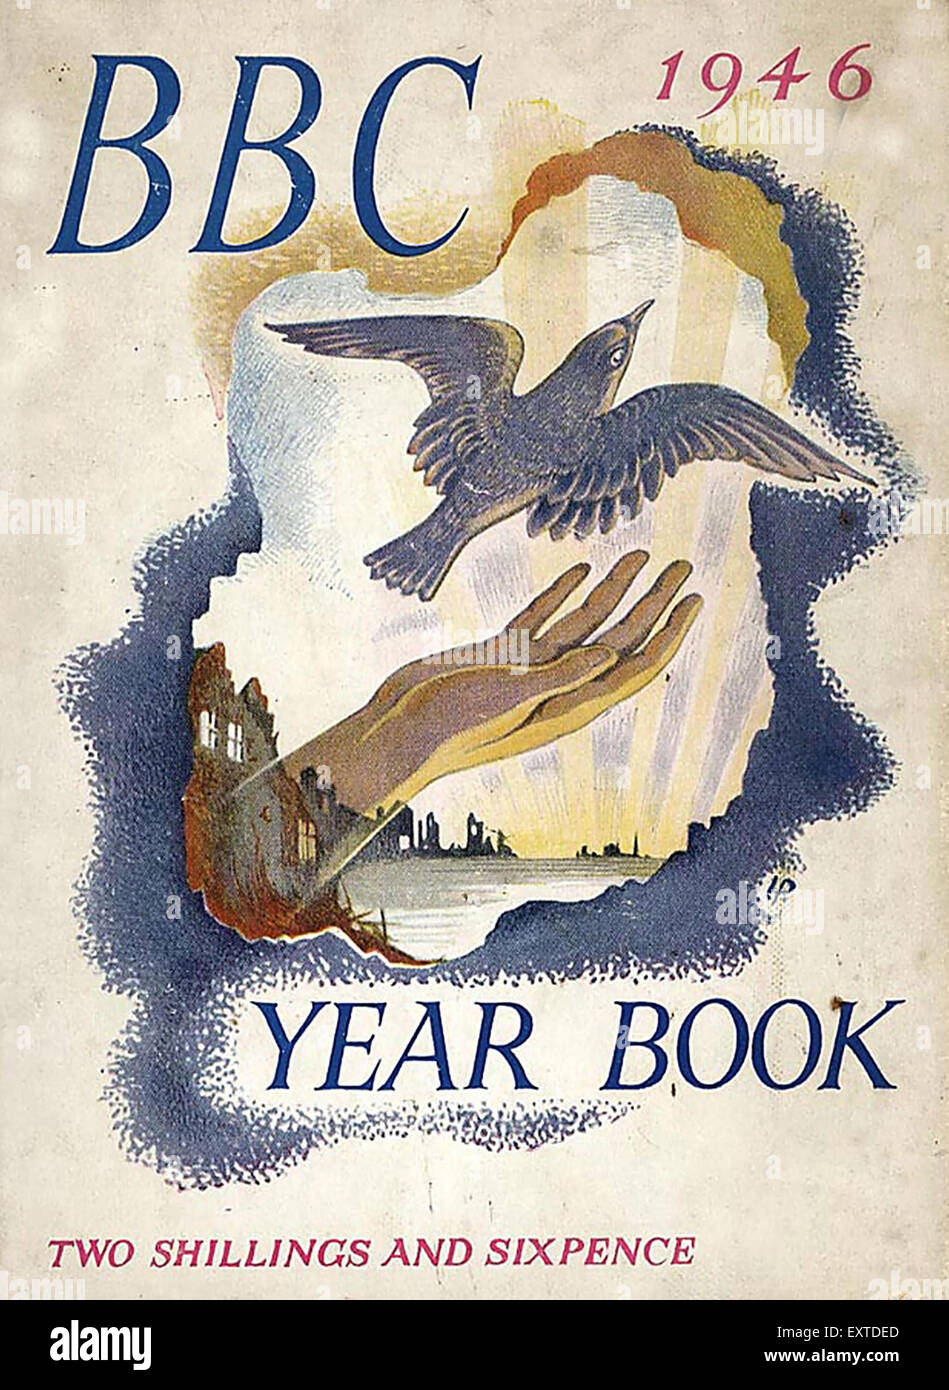 1940s UK BBC Year Book Book Cover Stock Photo